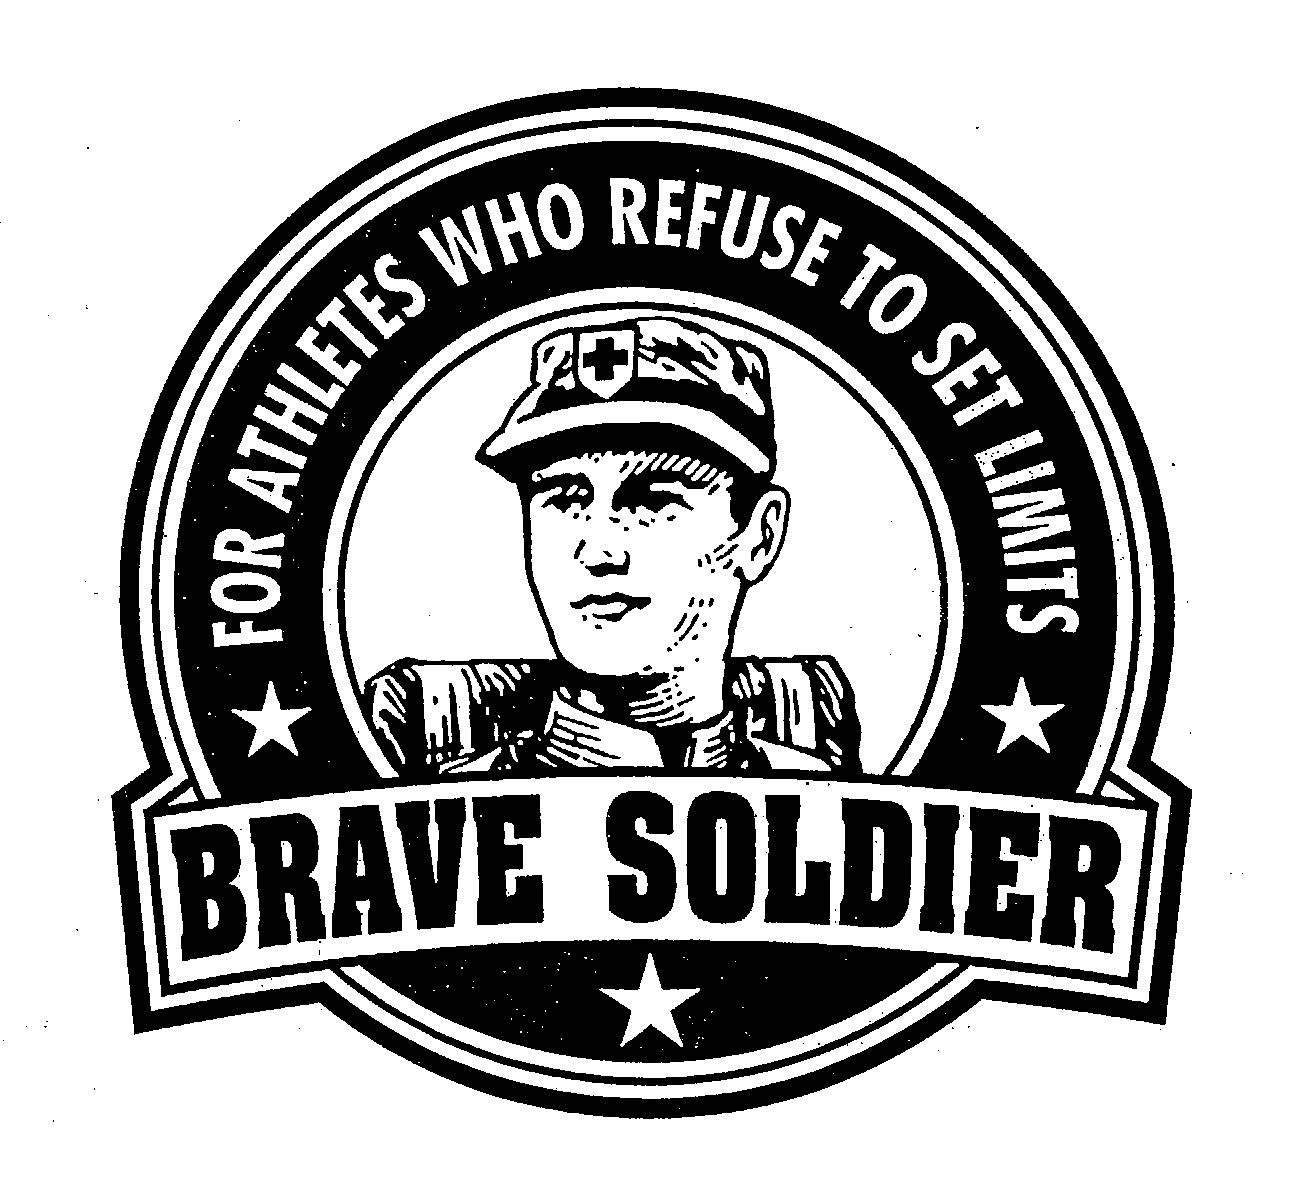 BRAVE SOLDIER FOR ATHLETES WHO REFUSE TO SET LIMITS